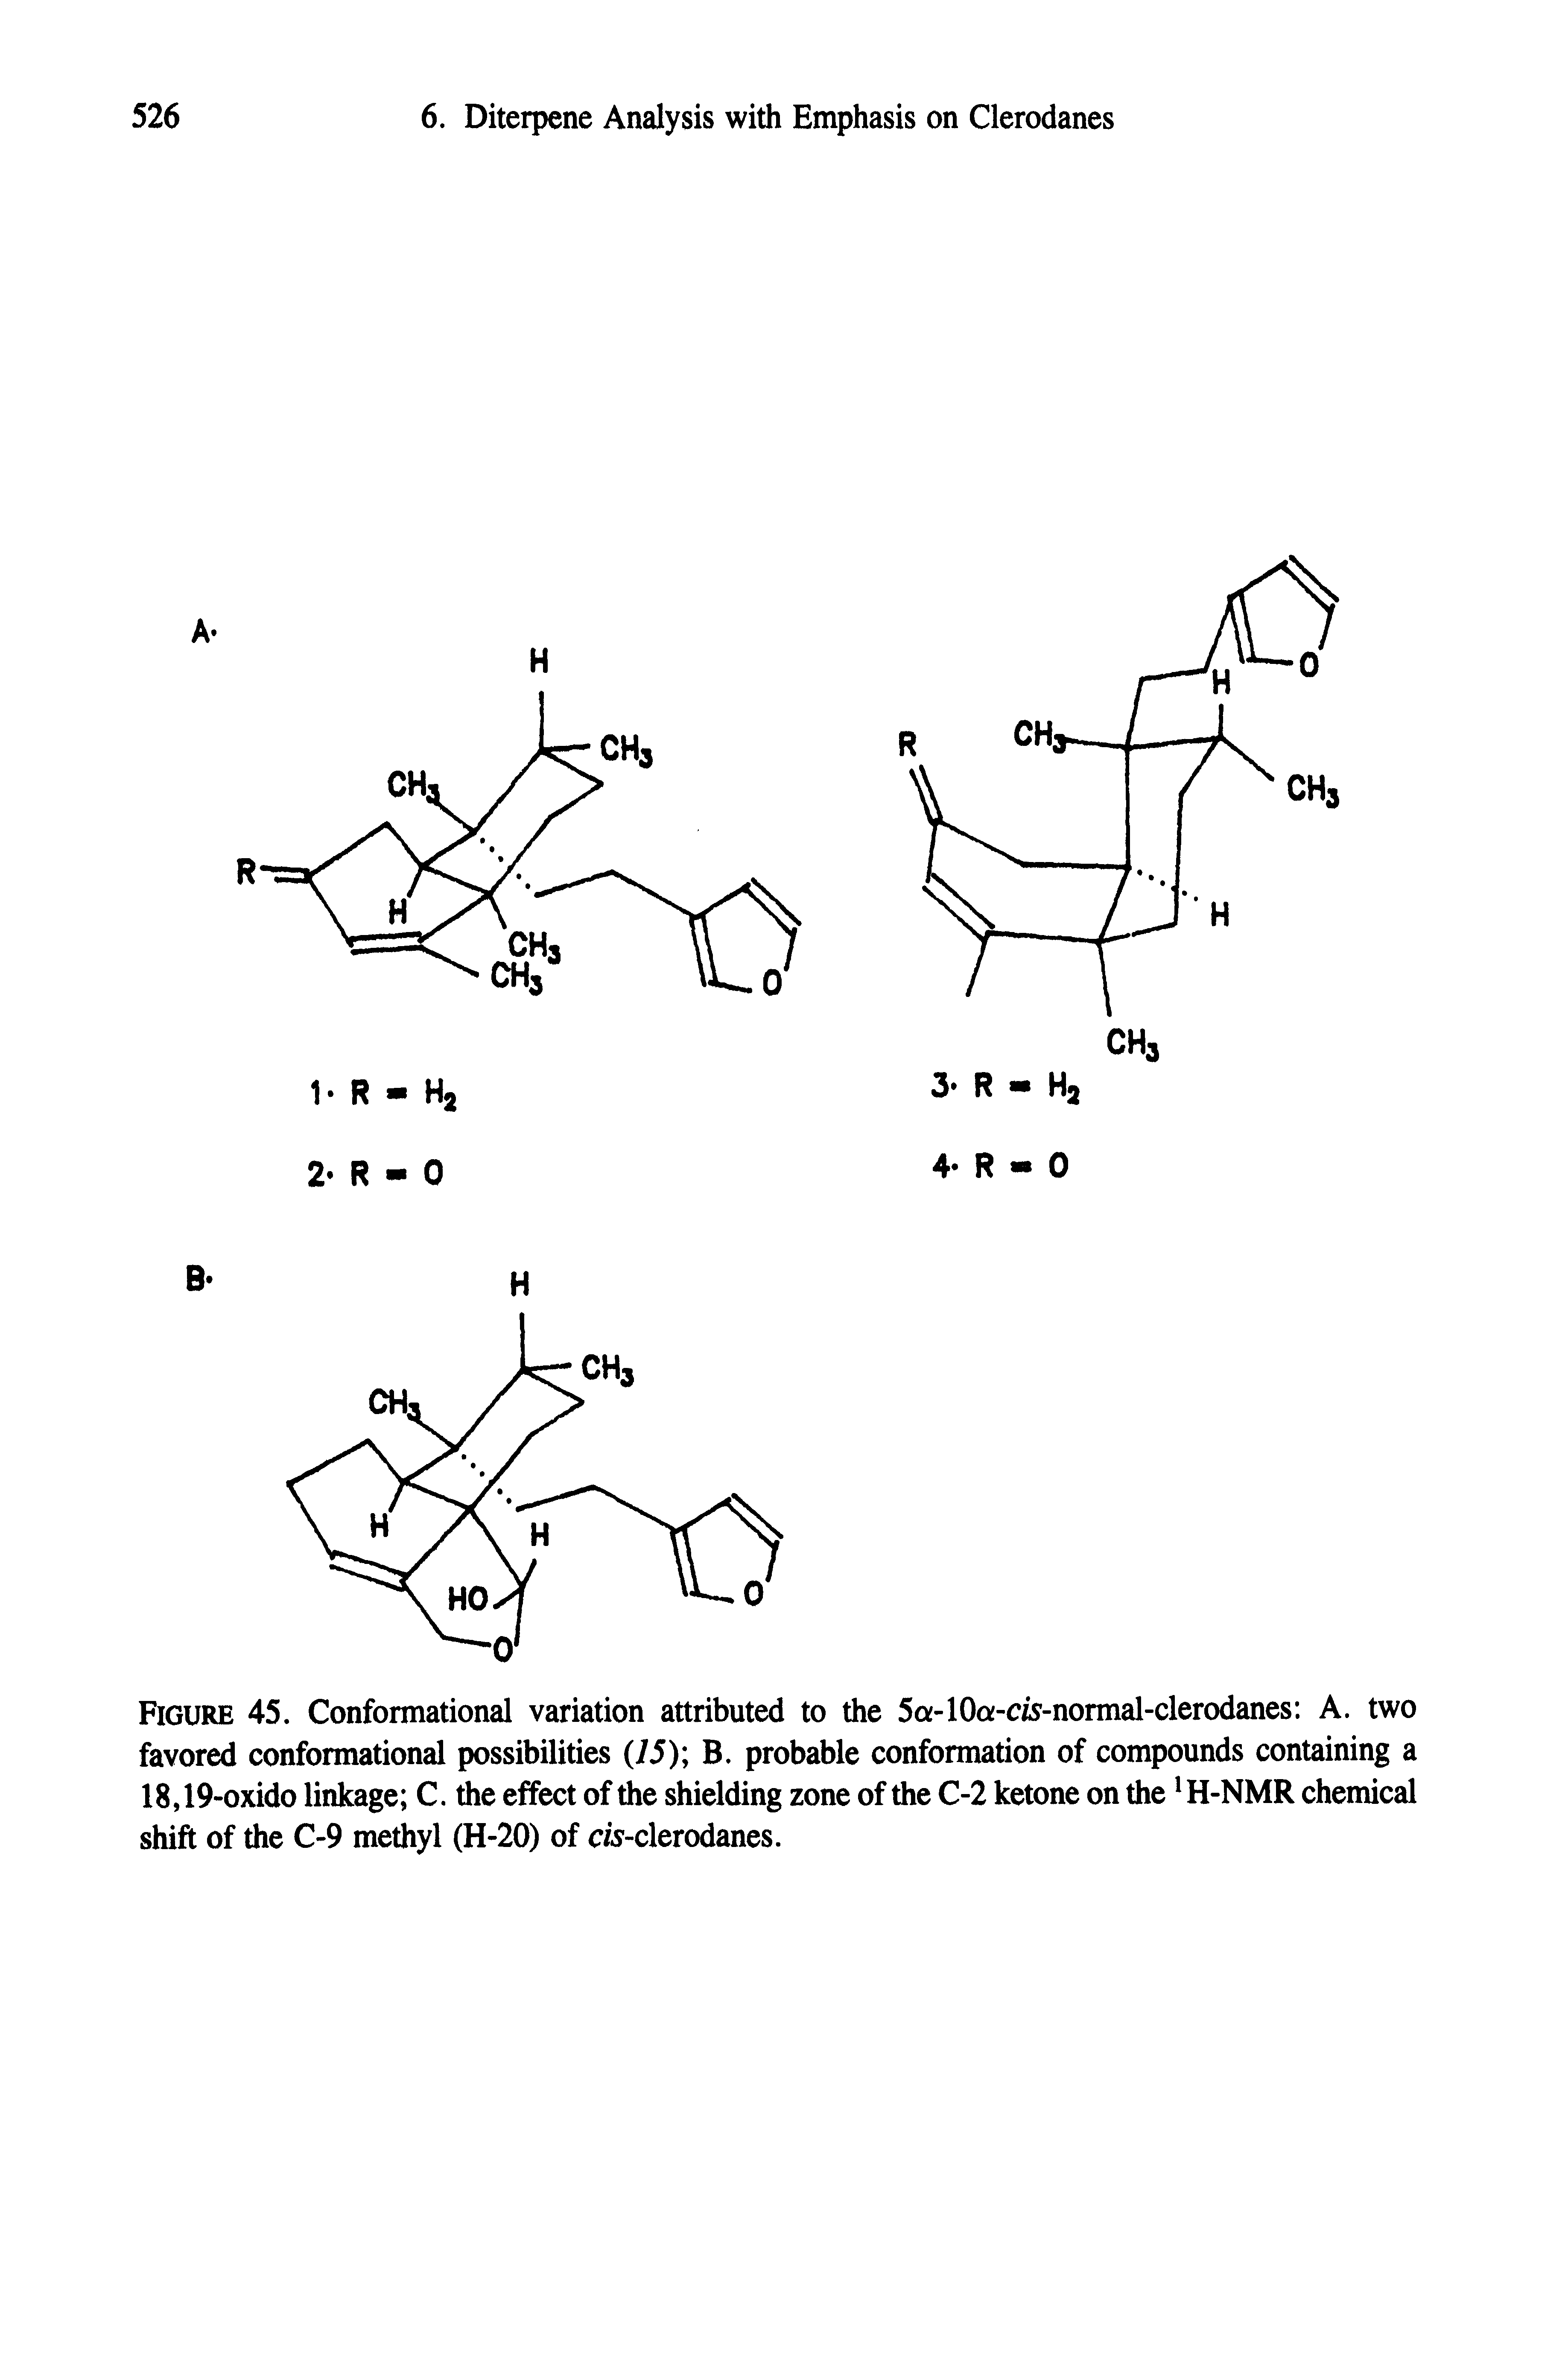 Figure 45. Conformational variation attributed to the 5a-10a-cis-normal-clerodanes A. two favored conformational possibilities (15) B. probable conformation of compounds containing a 18,19-oxido linkage C. the effect of the shielding zone of the C-2 ketone on the H-NMR chemical shift of the C-9 methyl (H-20) of cis-clerodanes.